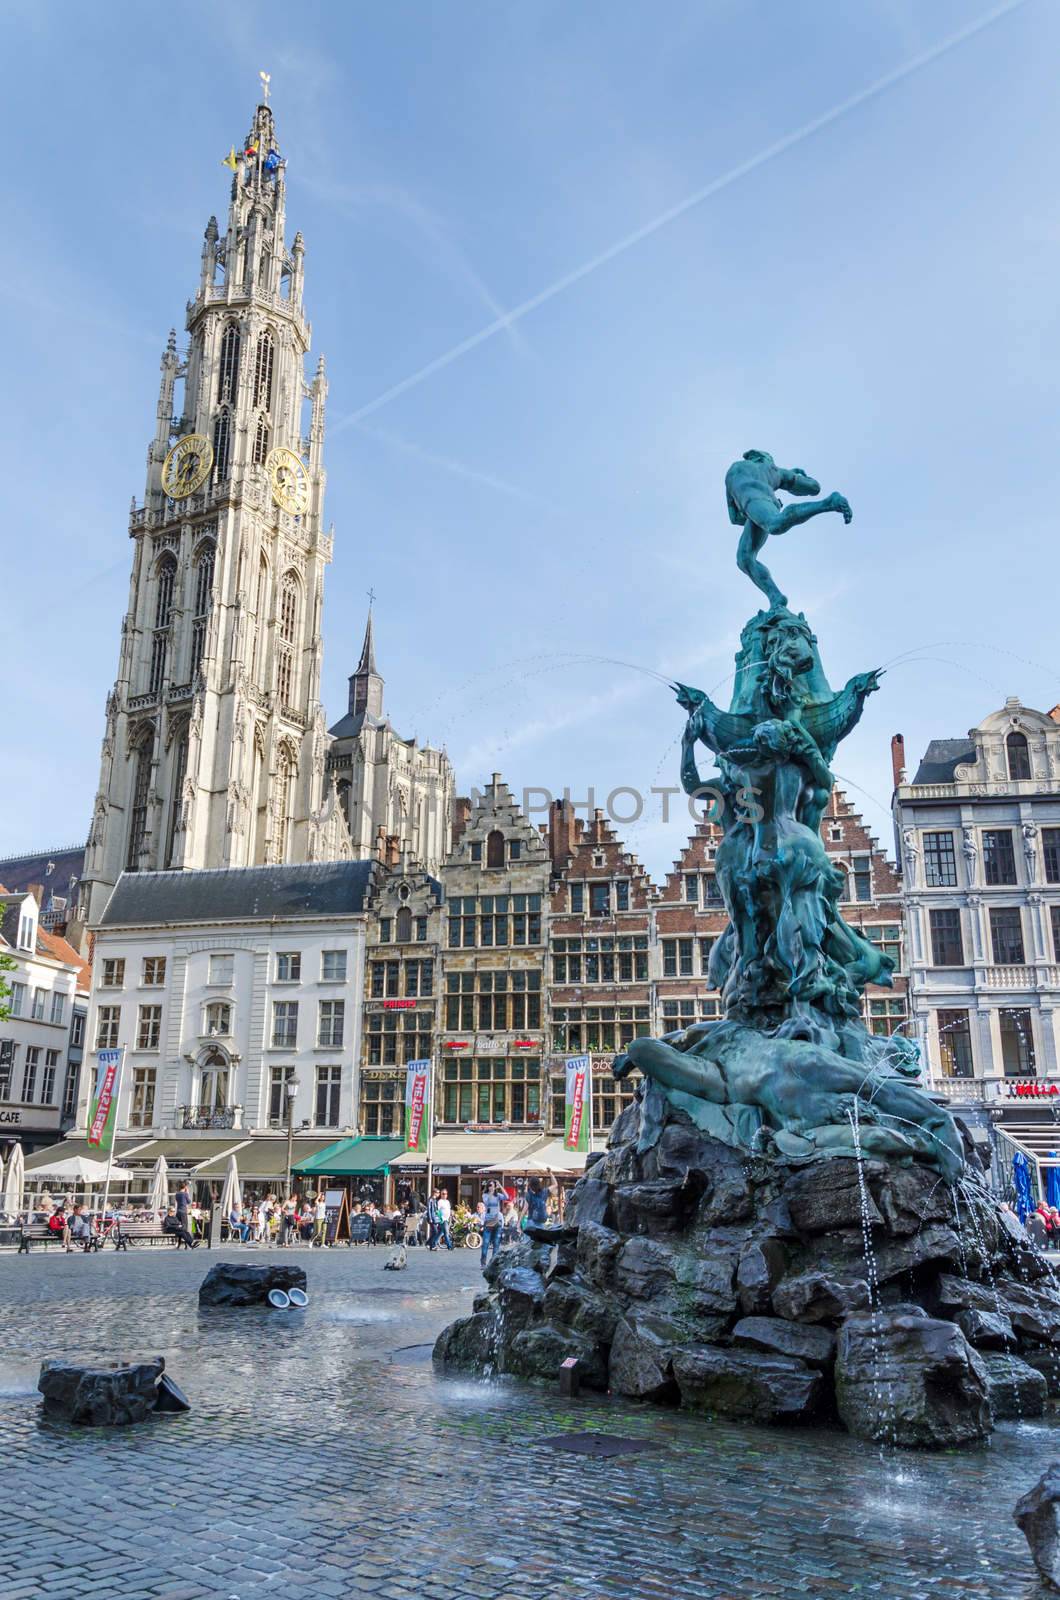 Antwerp, Belgium - May 10, 2015: Tourist visit The Grand Place with the Statue of Brabo, throwing the giant's hand into the Scheldt River and the Cathedral of our Lady. on May 10, 2015 in Antwerp, Belgium.